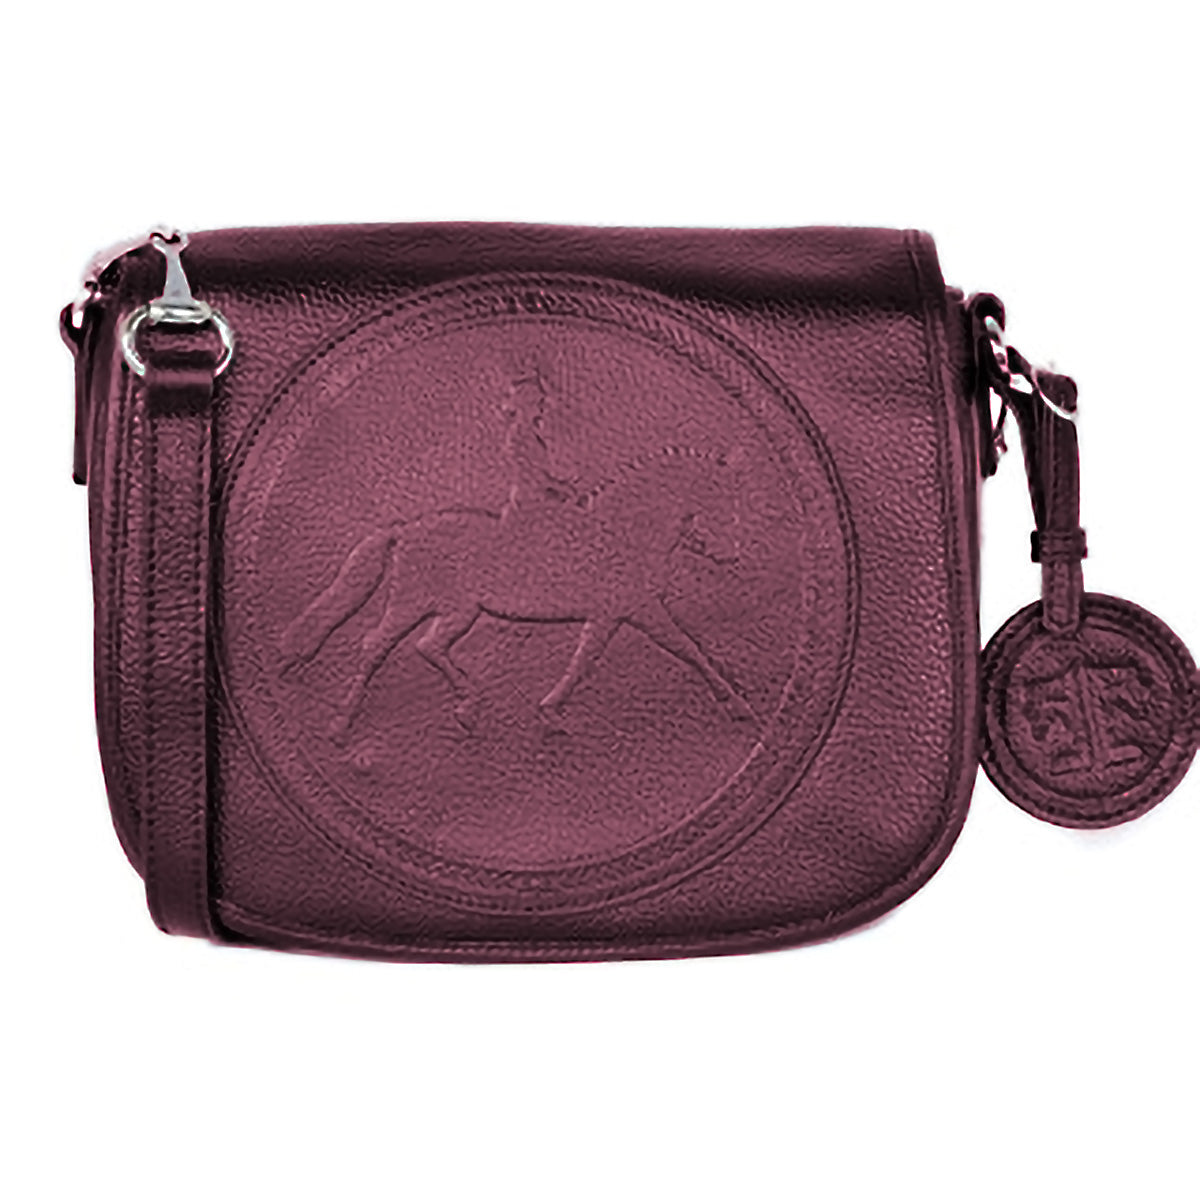 Lady Dior Lotus Wallet Mulberry Cannage Lambskin | DIOR US